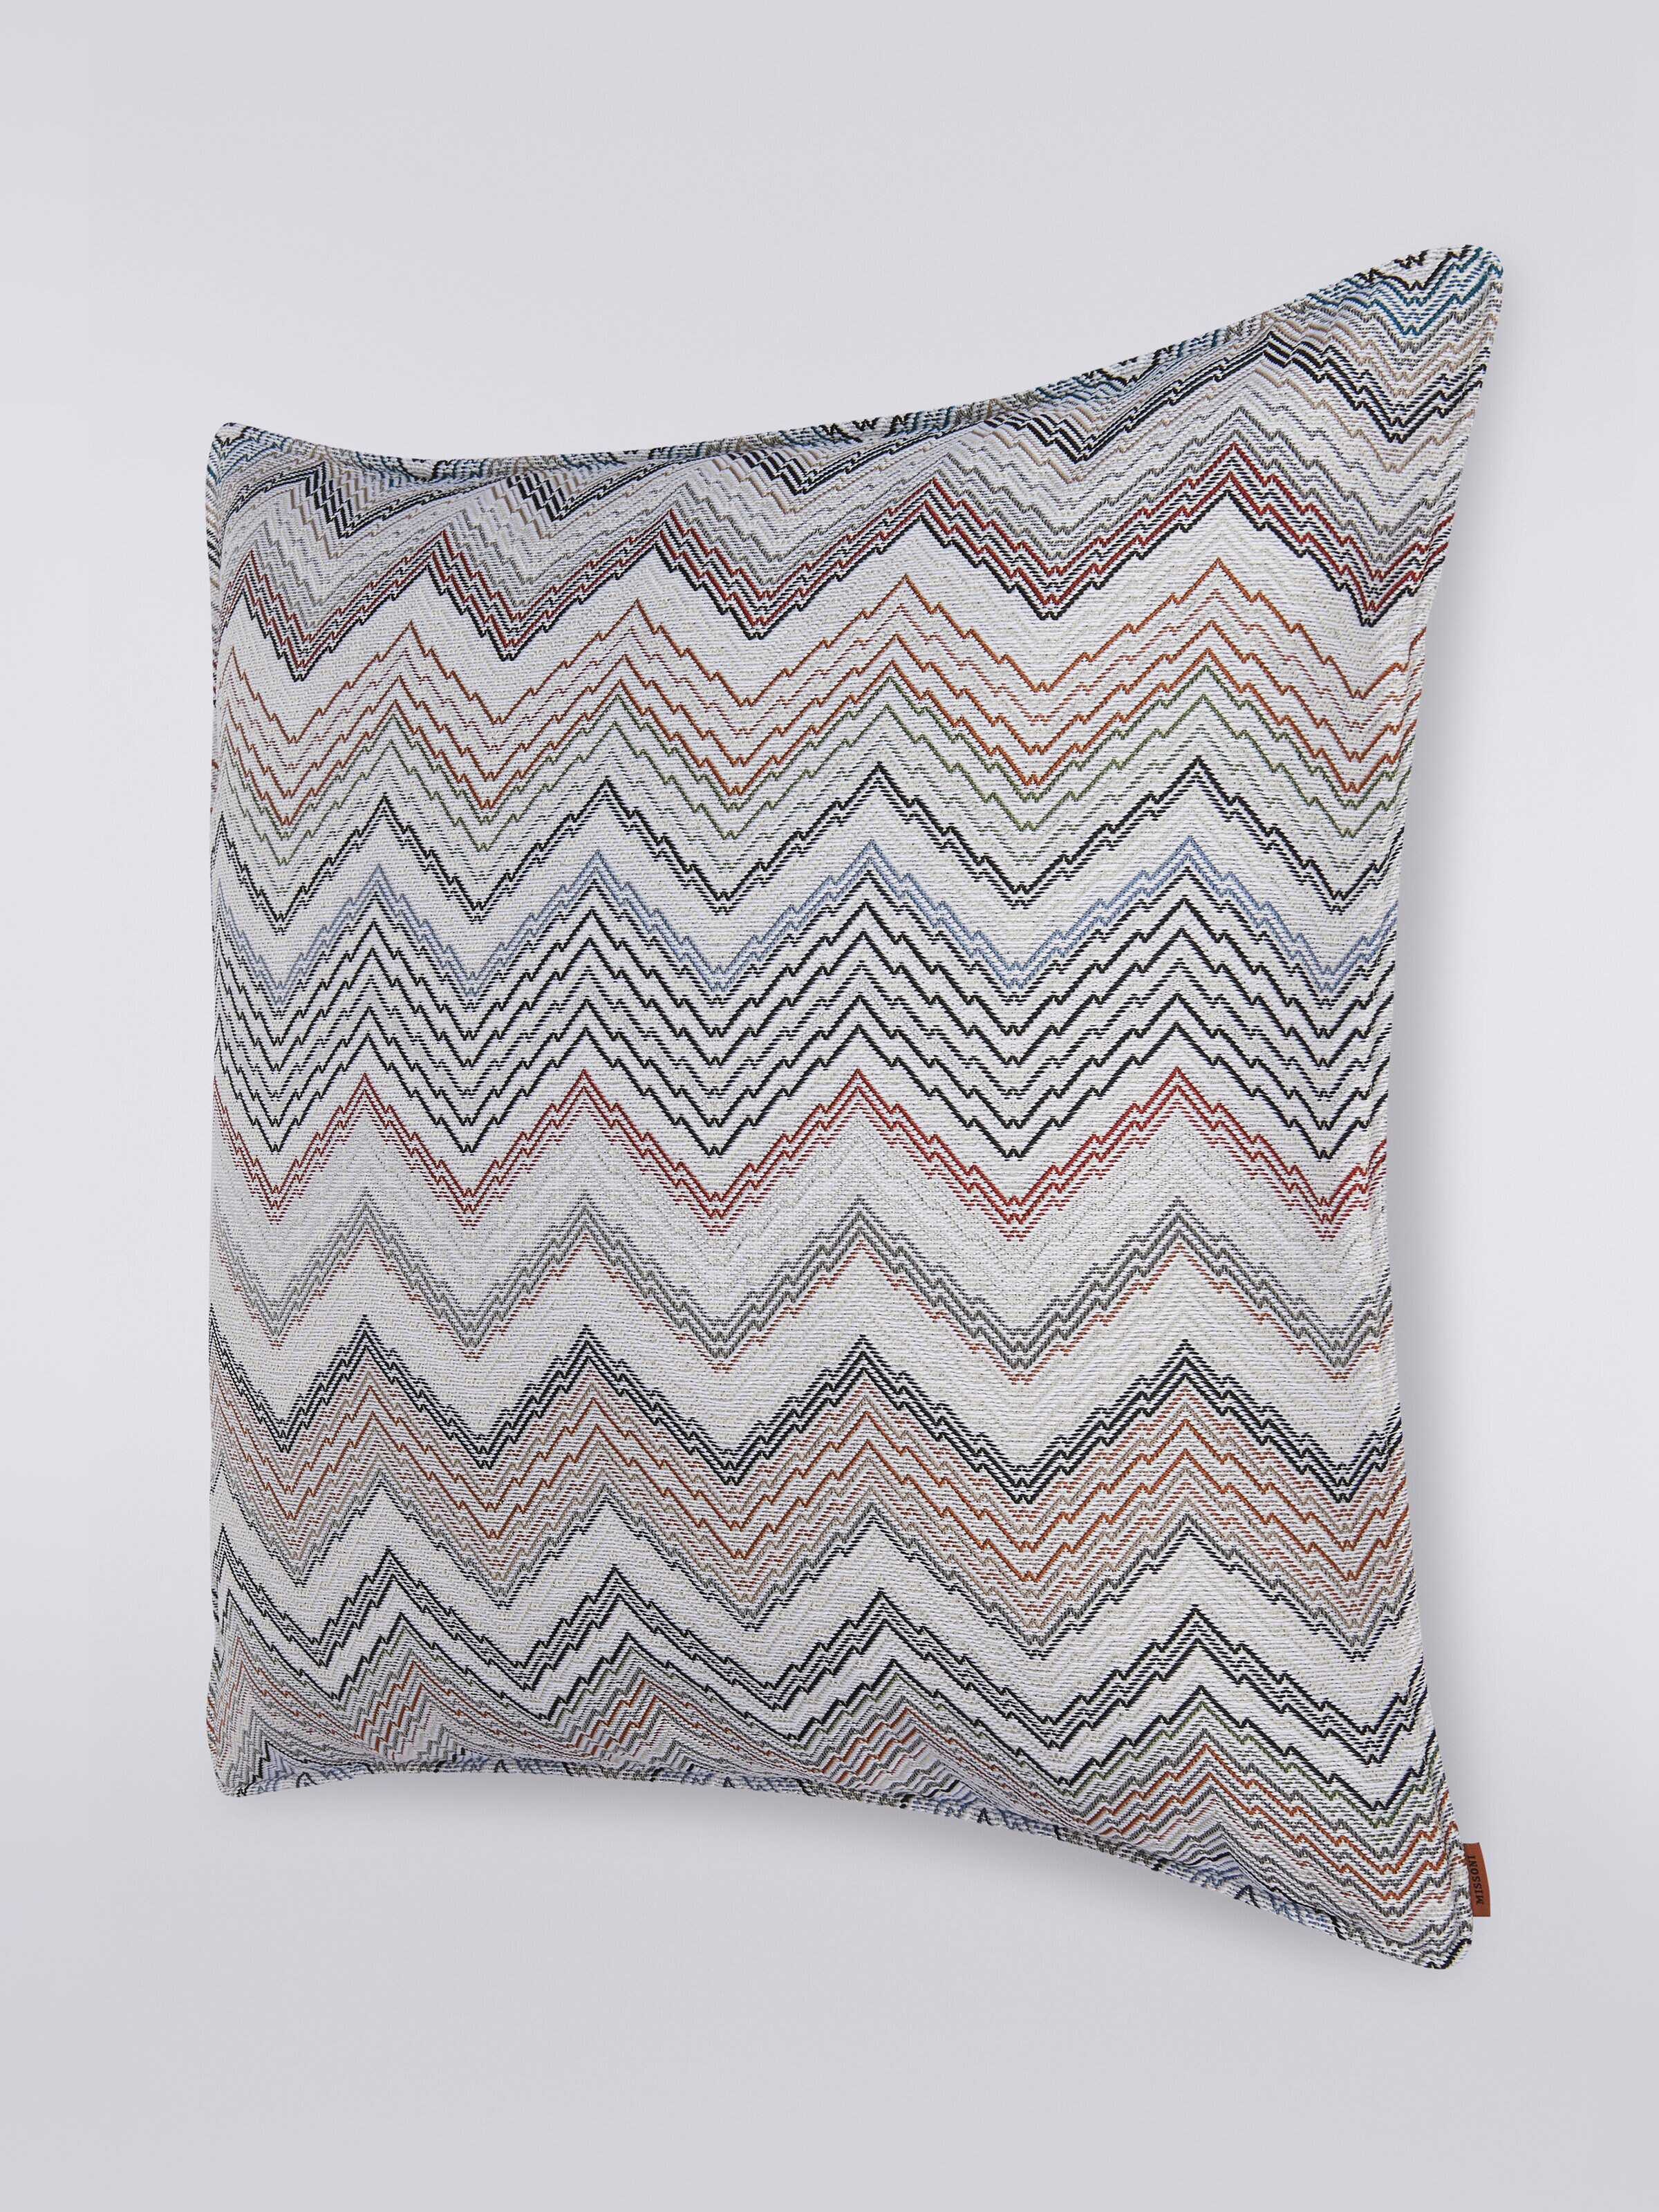 Milano 60x60 cm cushion with knitted effect, White  - 1